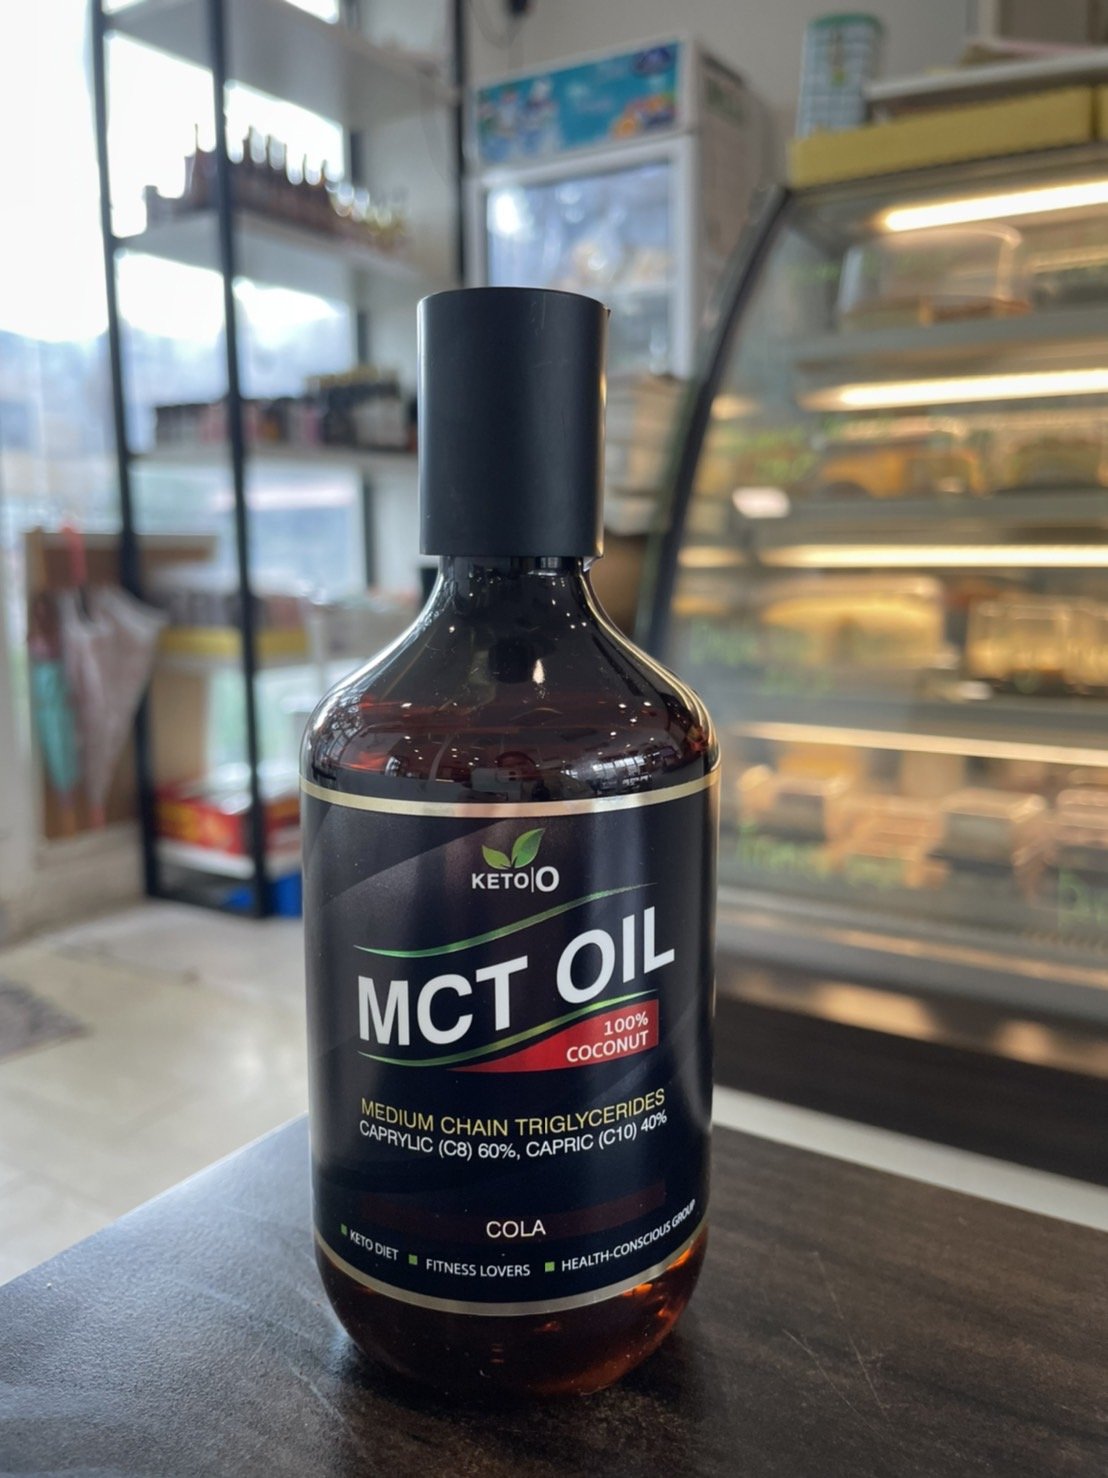 Mct oil cola